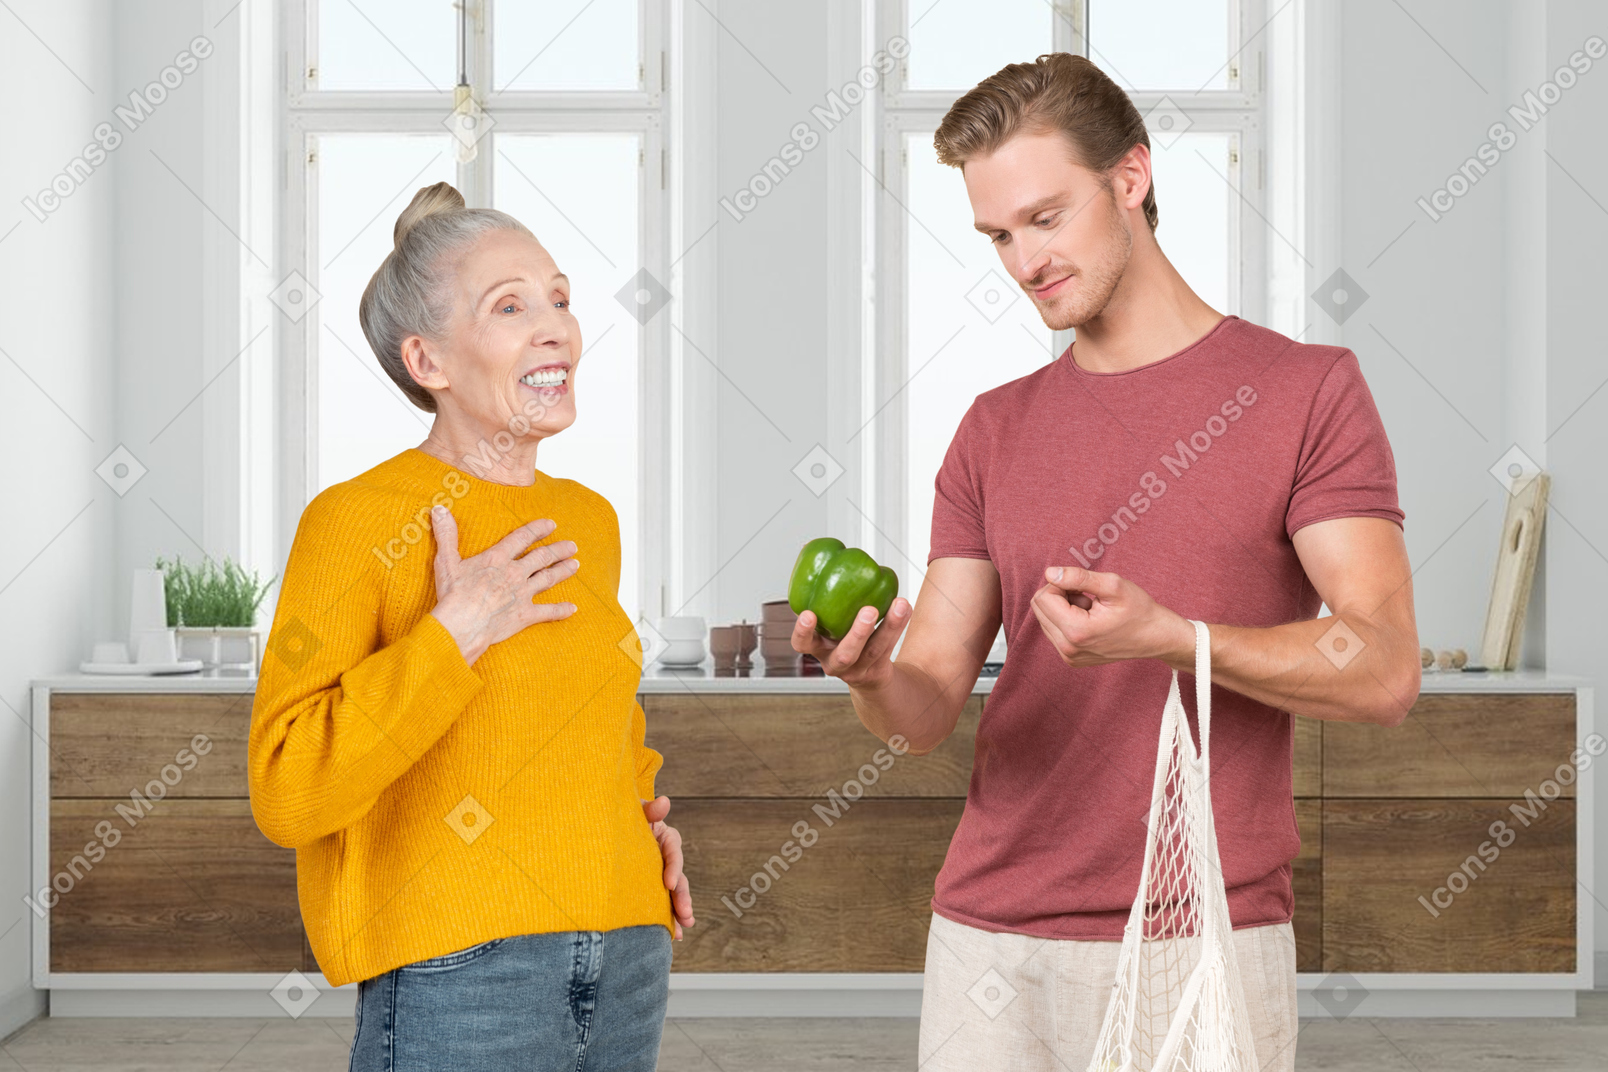 A man holding a green apple next to a woman